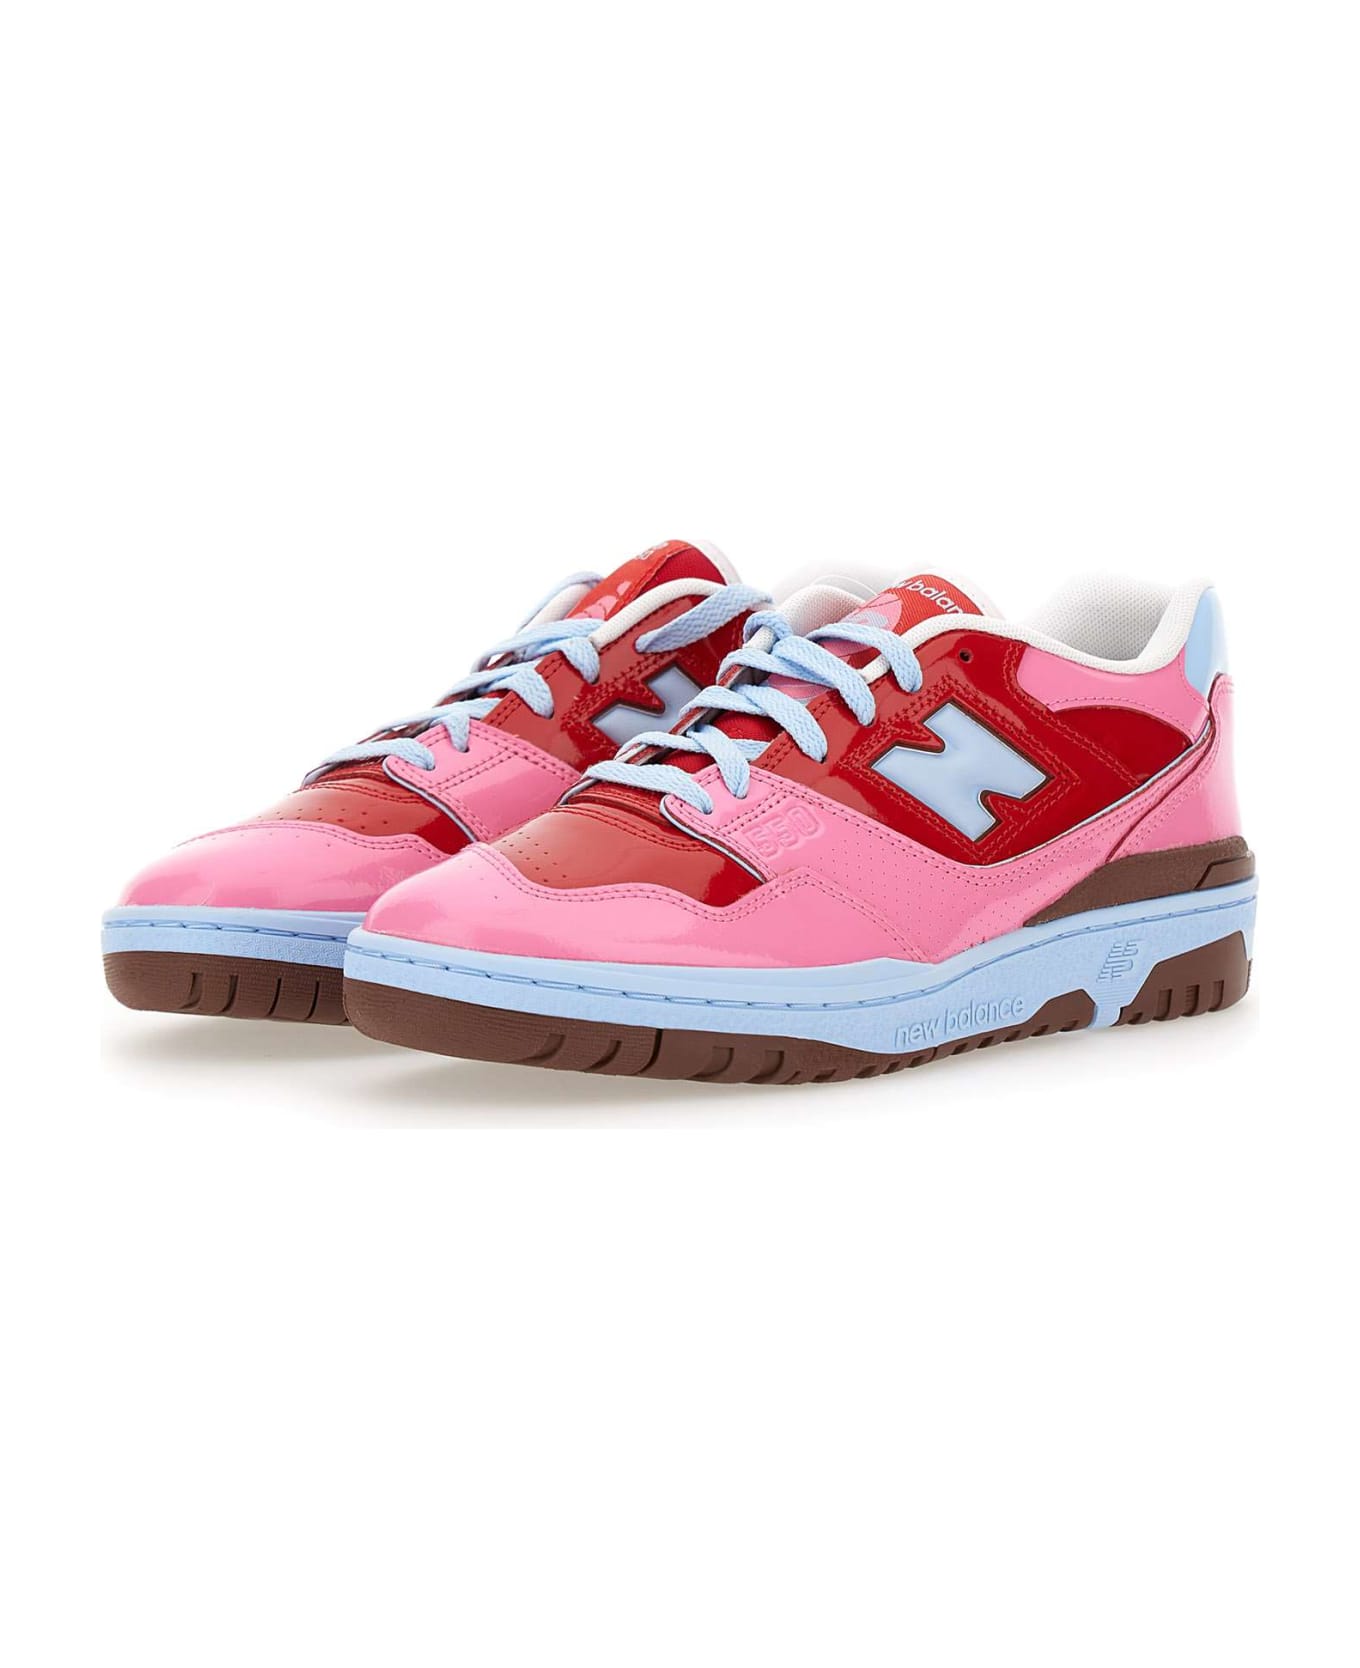 New Balance "bb550" Sneakers - Red-pink